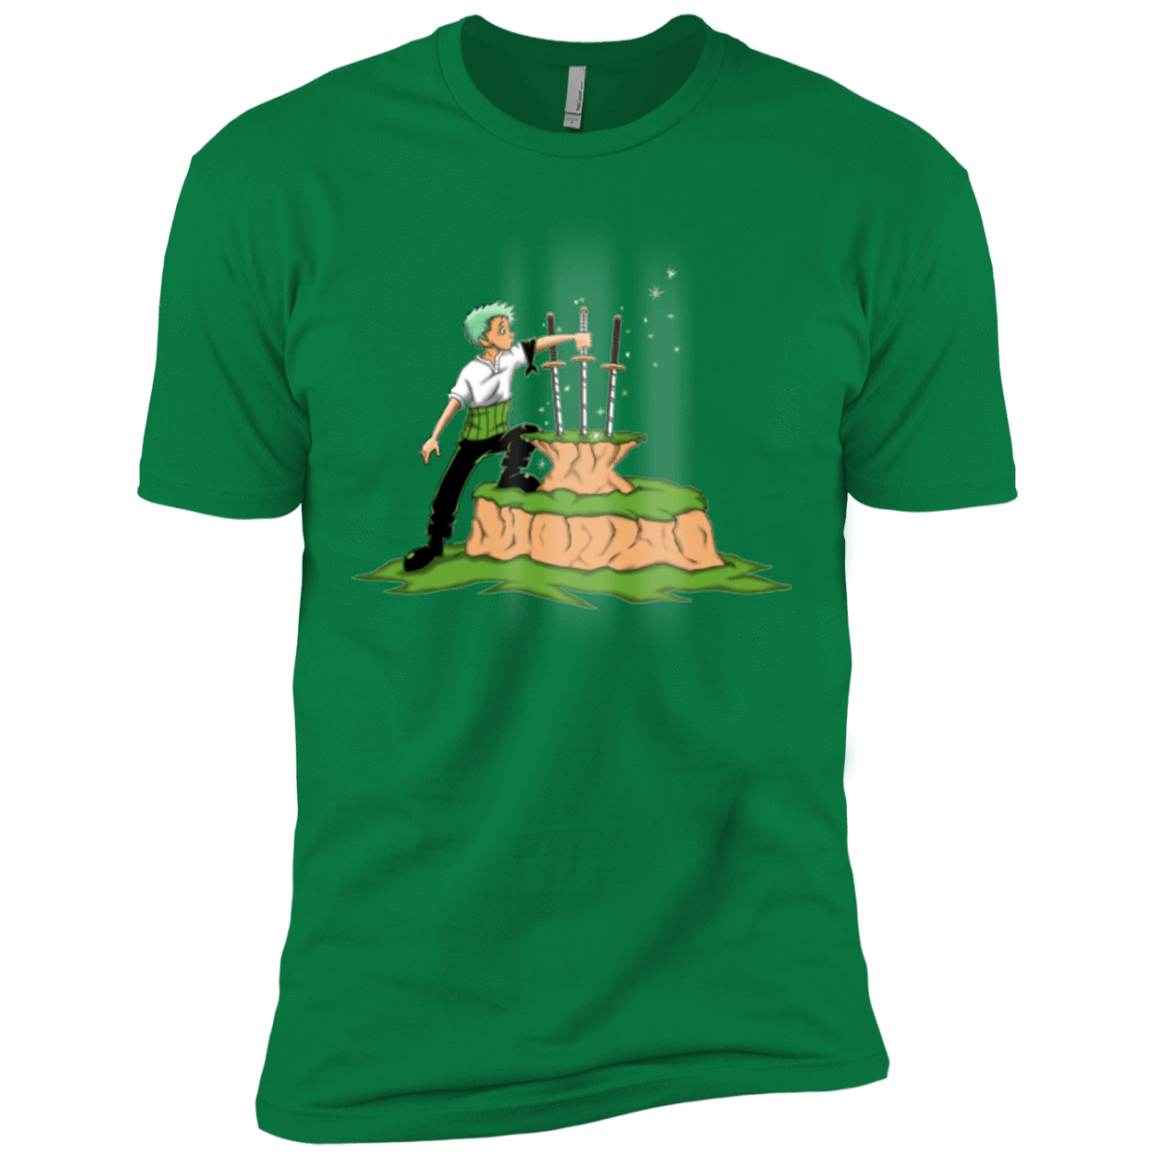 T-Shirts Kelly Green / X-Small 3 Swords in the Stone Men's Premium T-Shirt